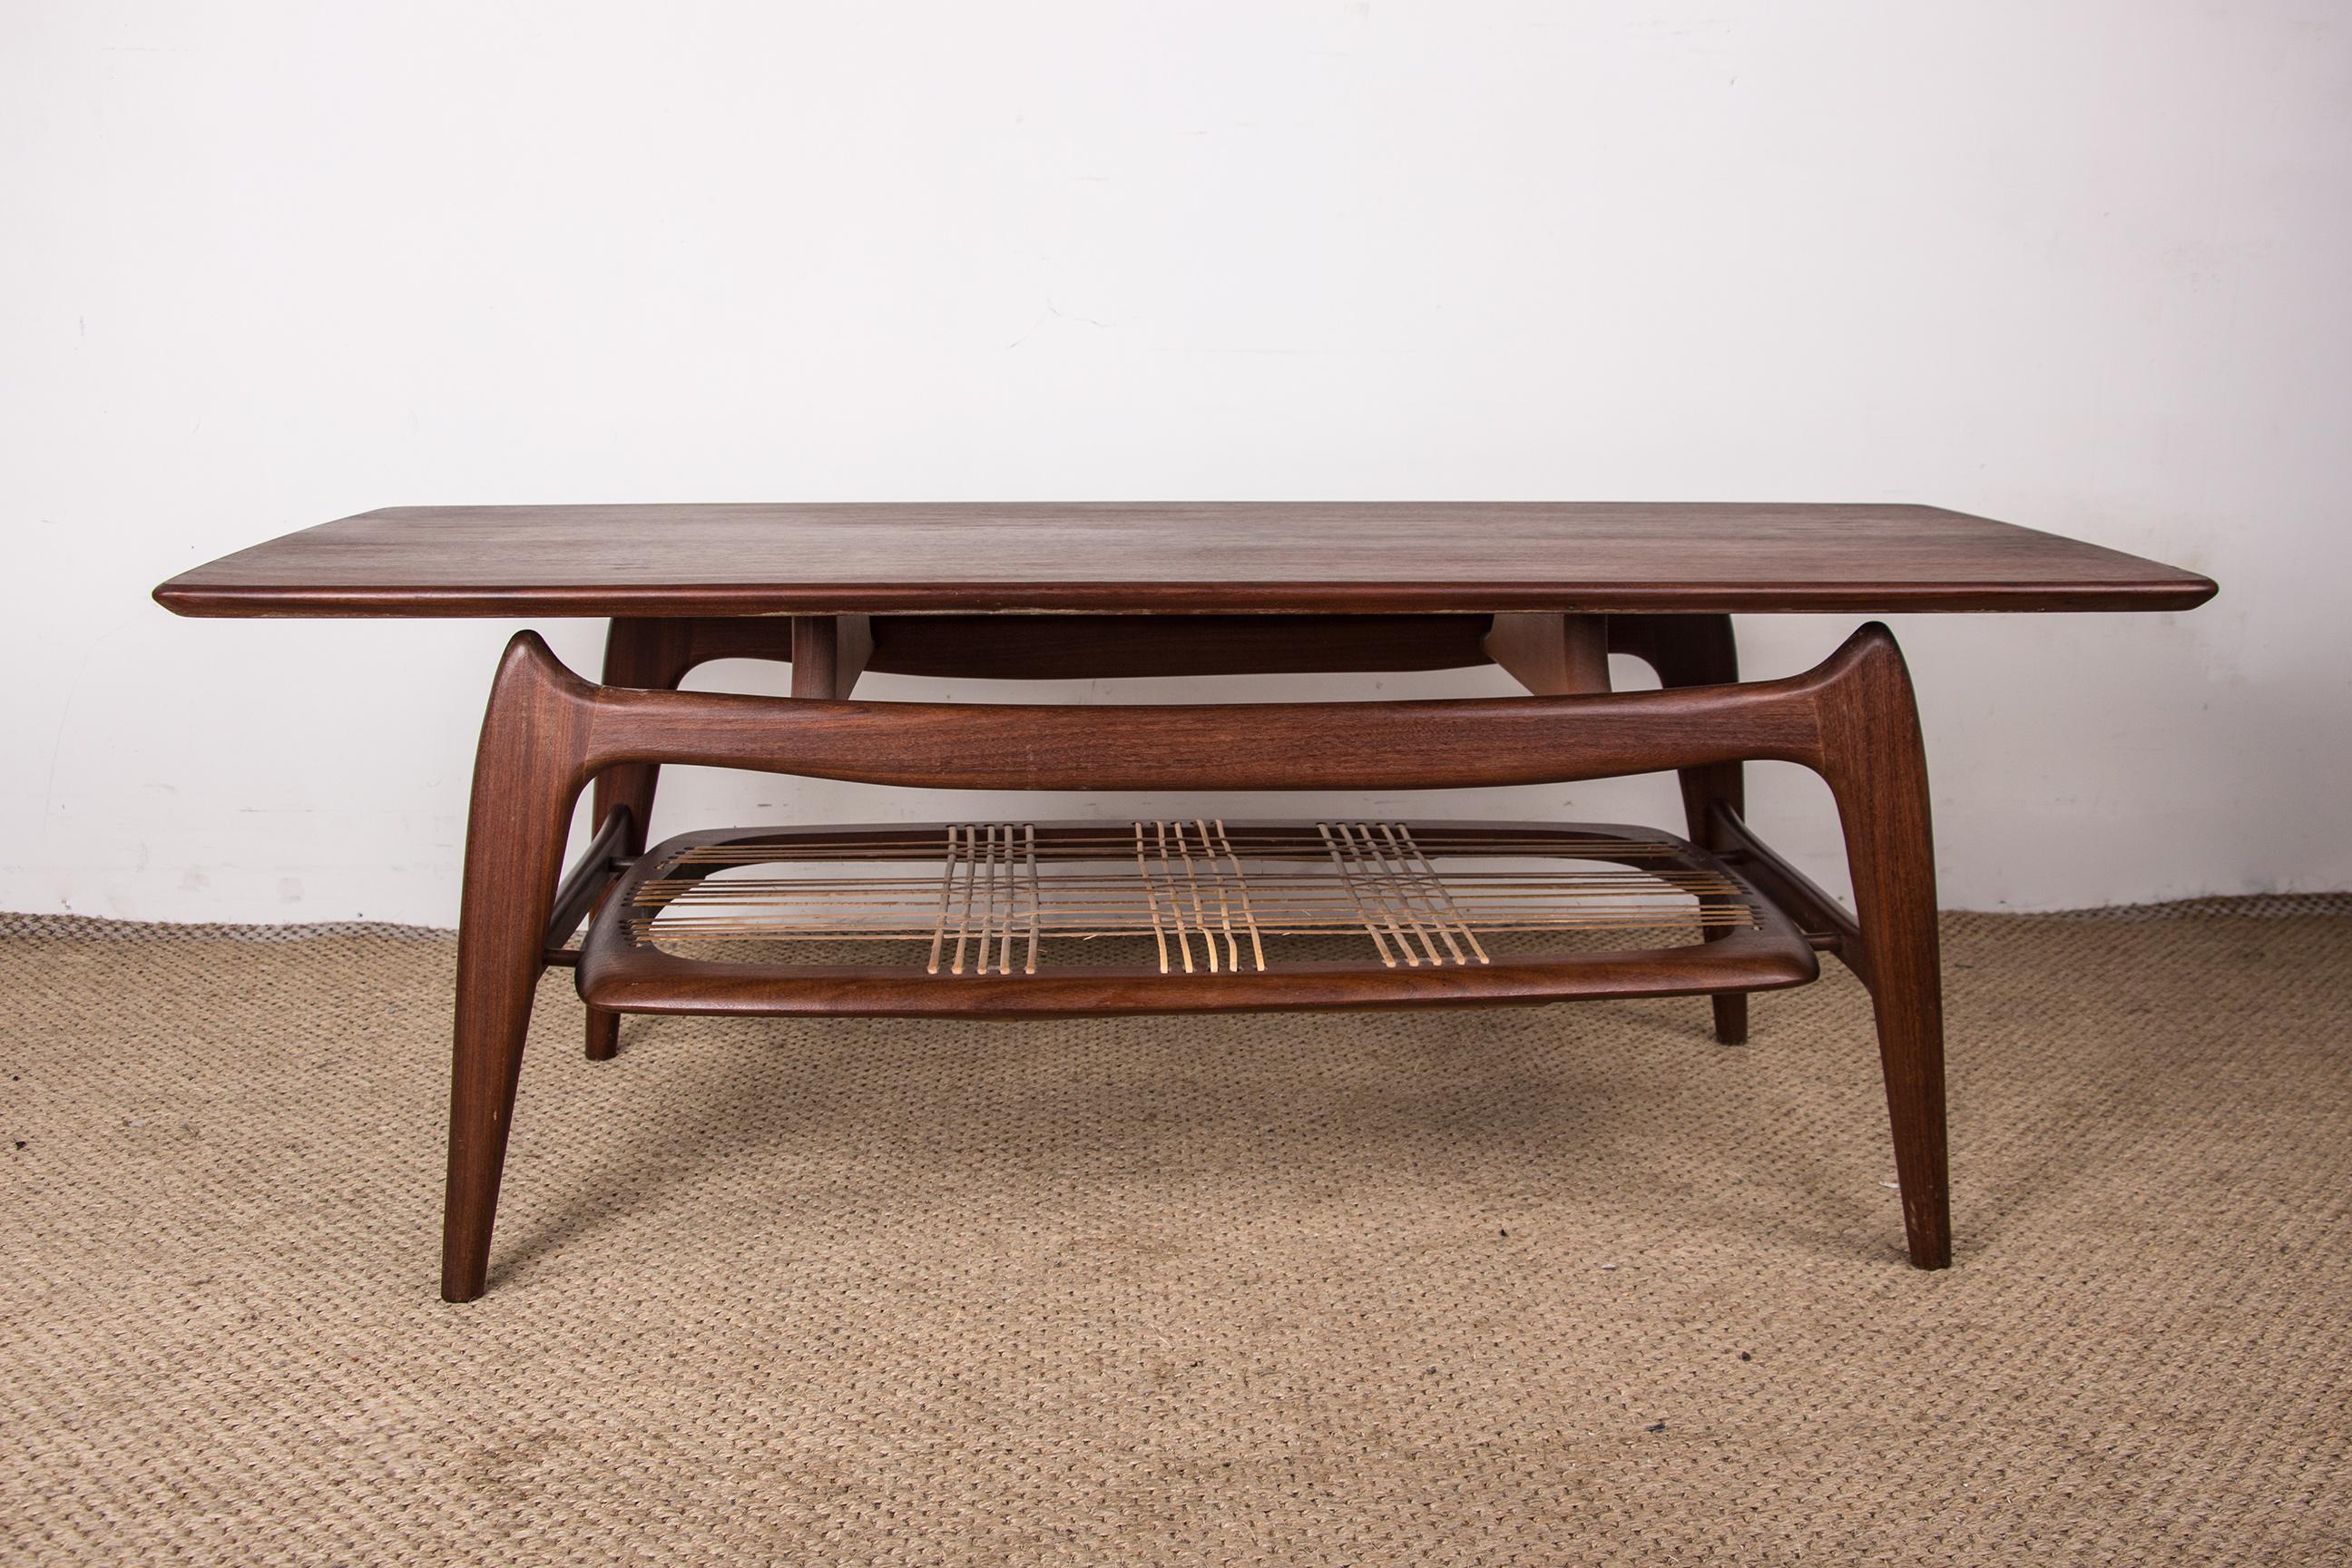 Dutch Large Coffee Table, 2 levels, in Teak and Rattan, Louis van Teeffelen for WéBé. For Sale